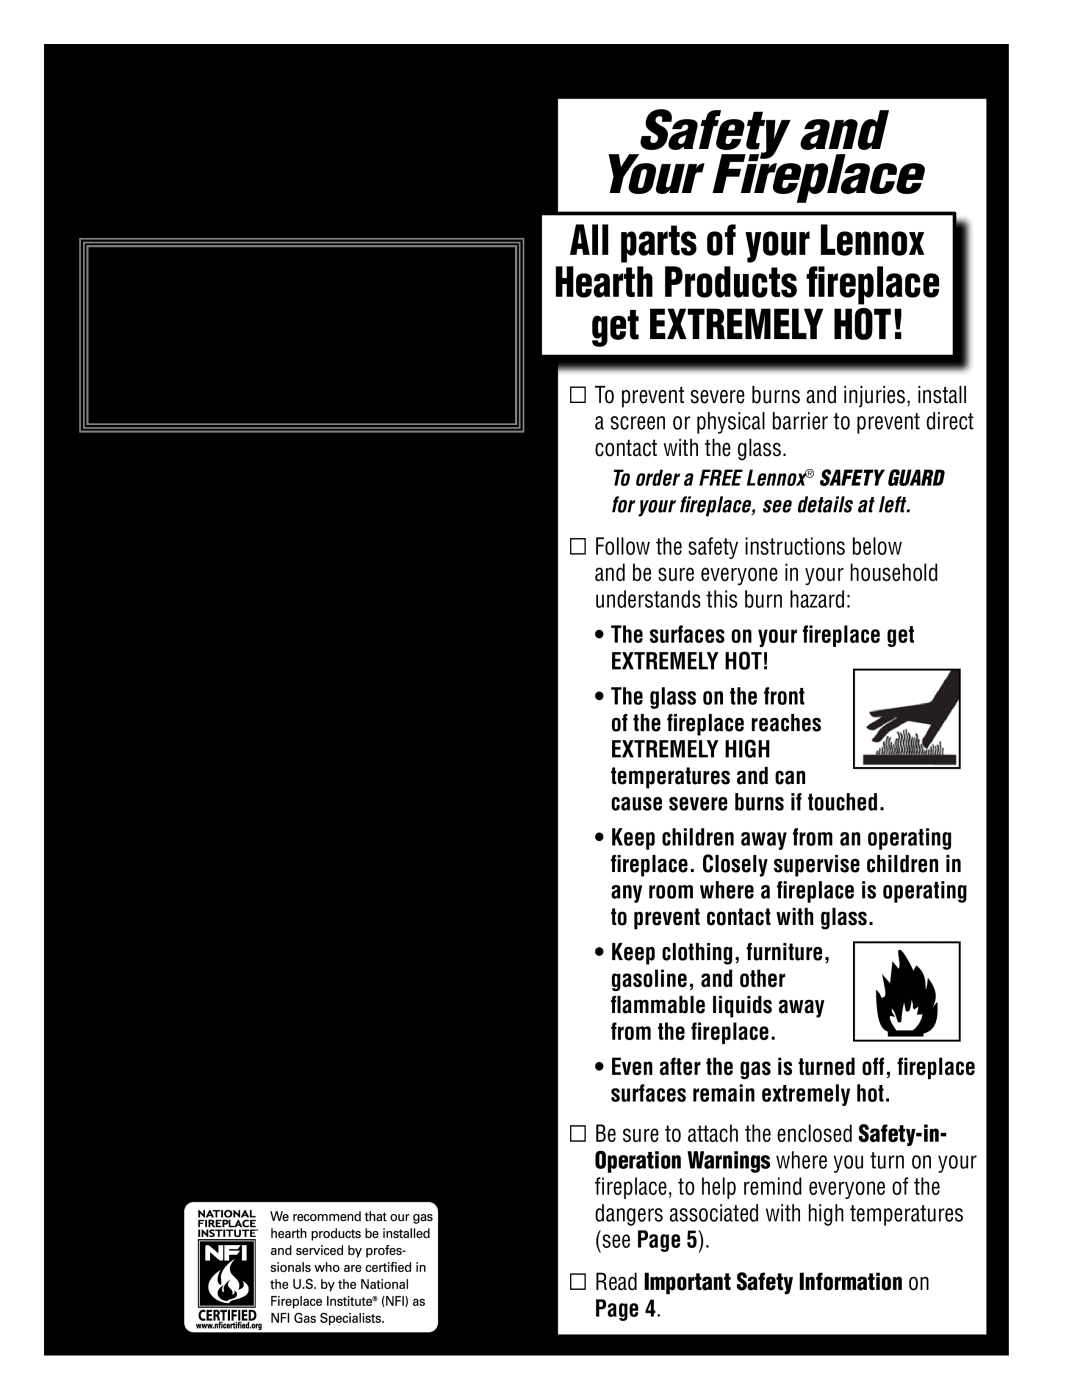 Lennox Hearth LSM40ST-N-PV Safety and Your Fireplace, • Free Safety Guard Offer •, Table Of Contents 